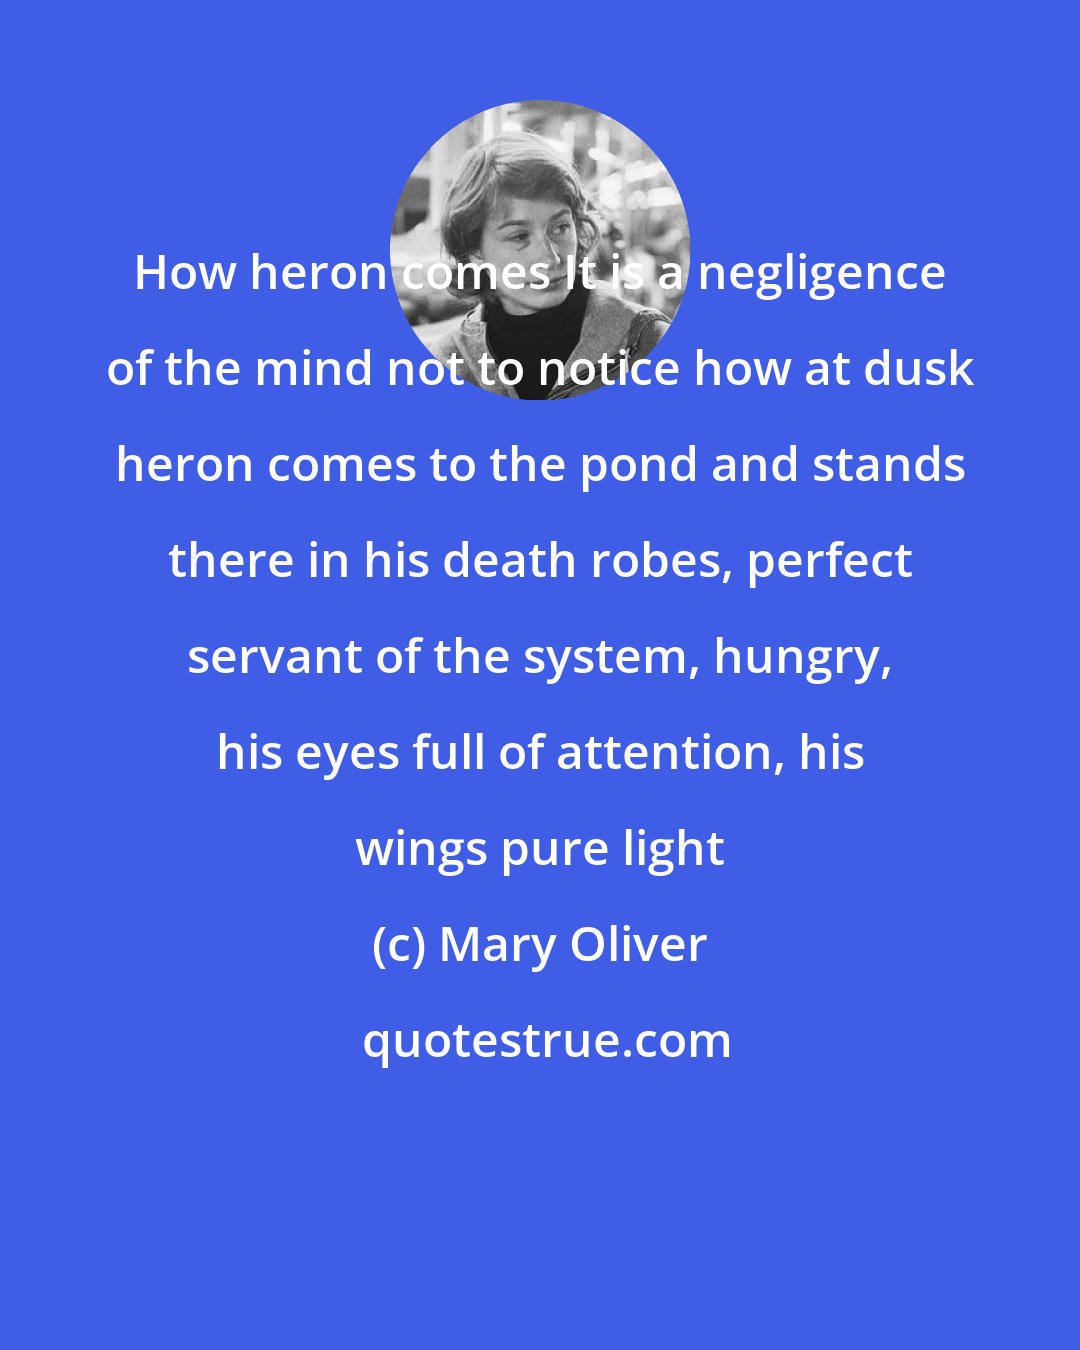 Mary Oliver: How heron comes It is a negligence of the mind not to notice how at dusk heron comes to the pond and stands there in his death robes, perfect servant of the system, hungry, his eyes full of attention, his wings pure light